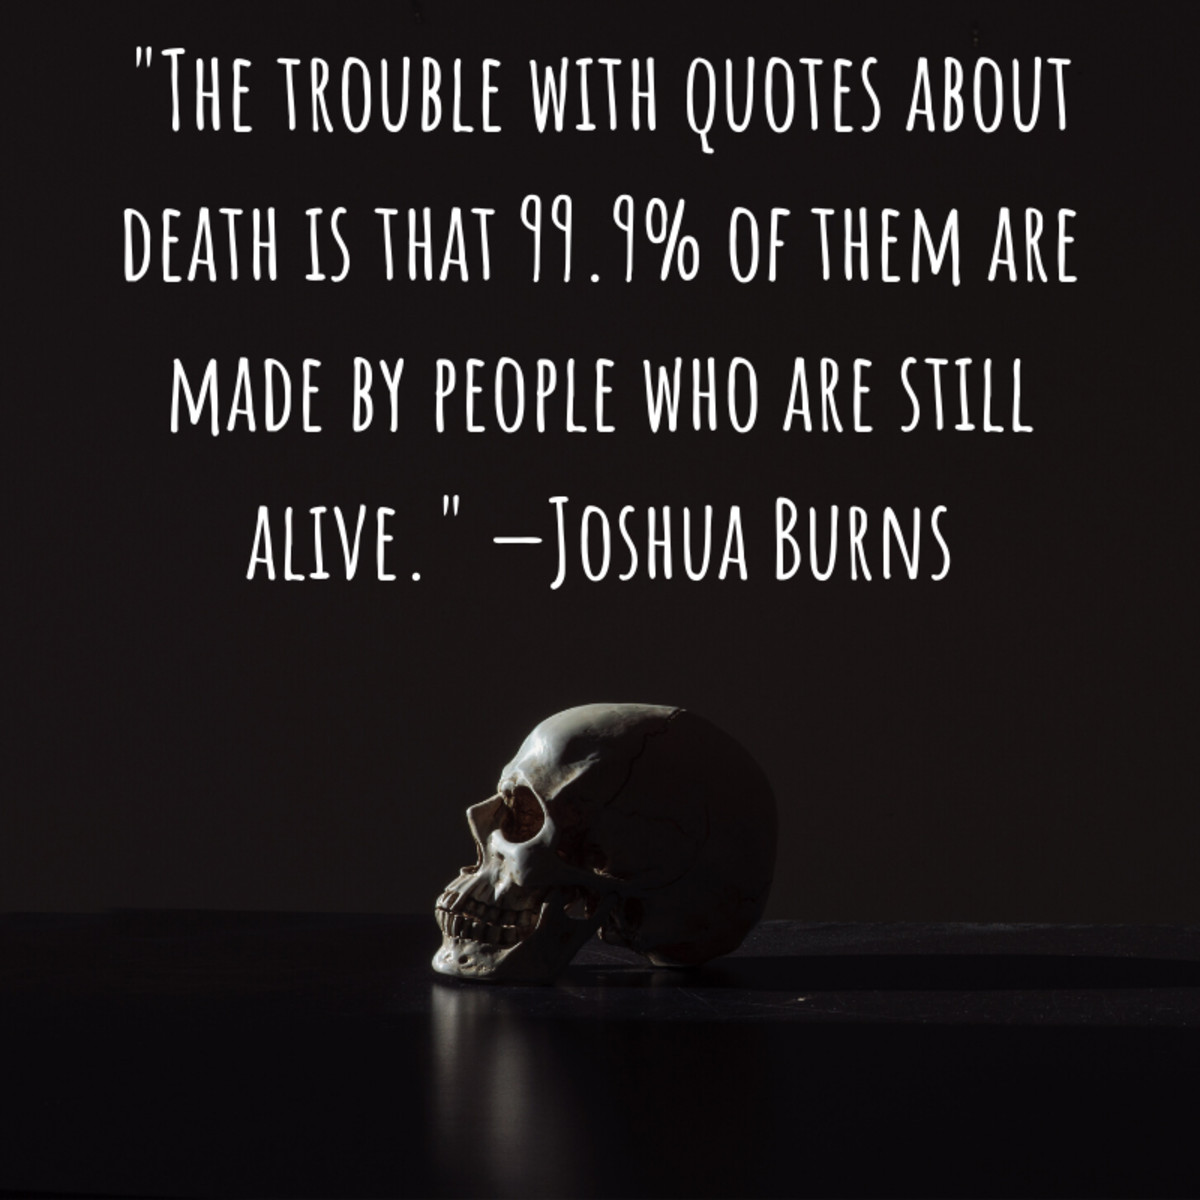 Funny Quotes About Death
 Funny and Clever Quotes About Mortality Death and Dying